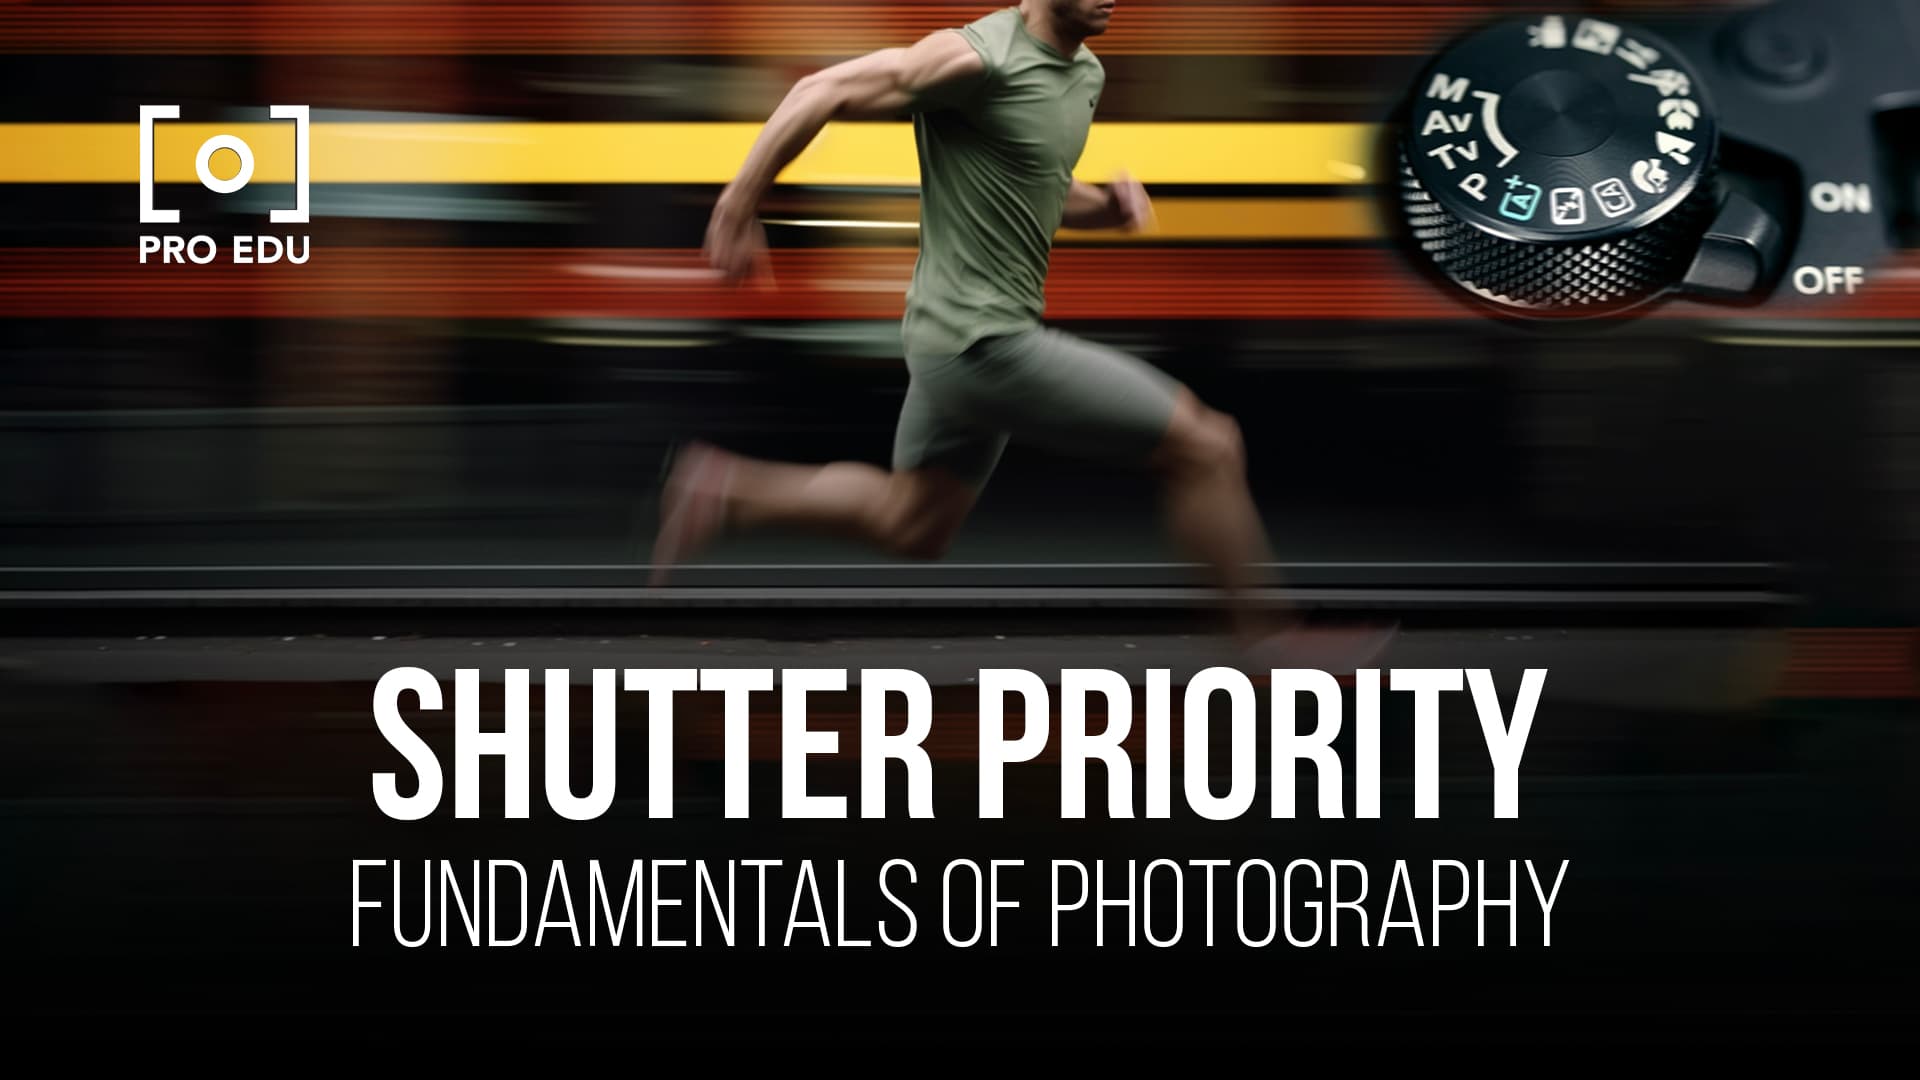 Capturing motion with precision using shutter priority mode in photography